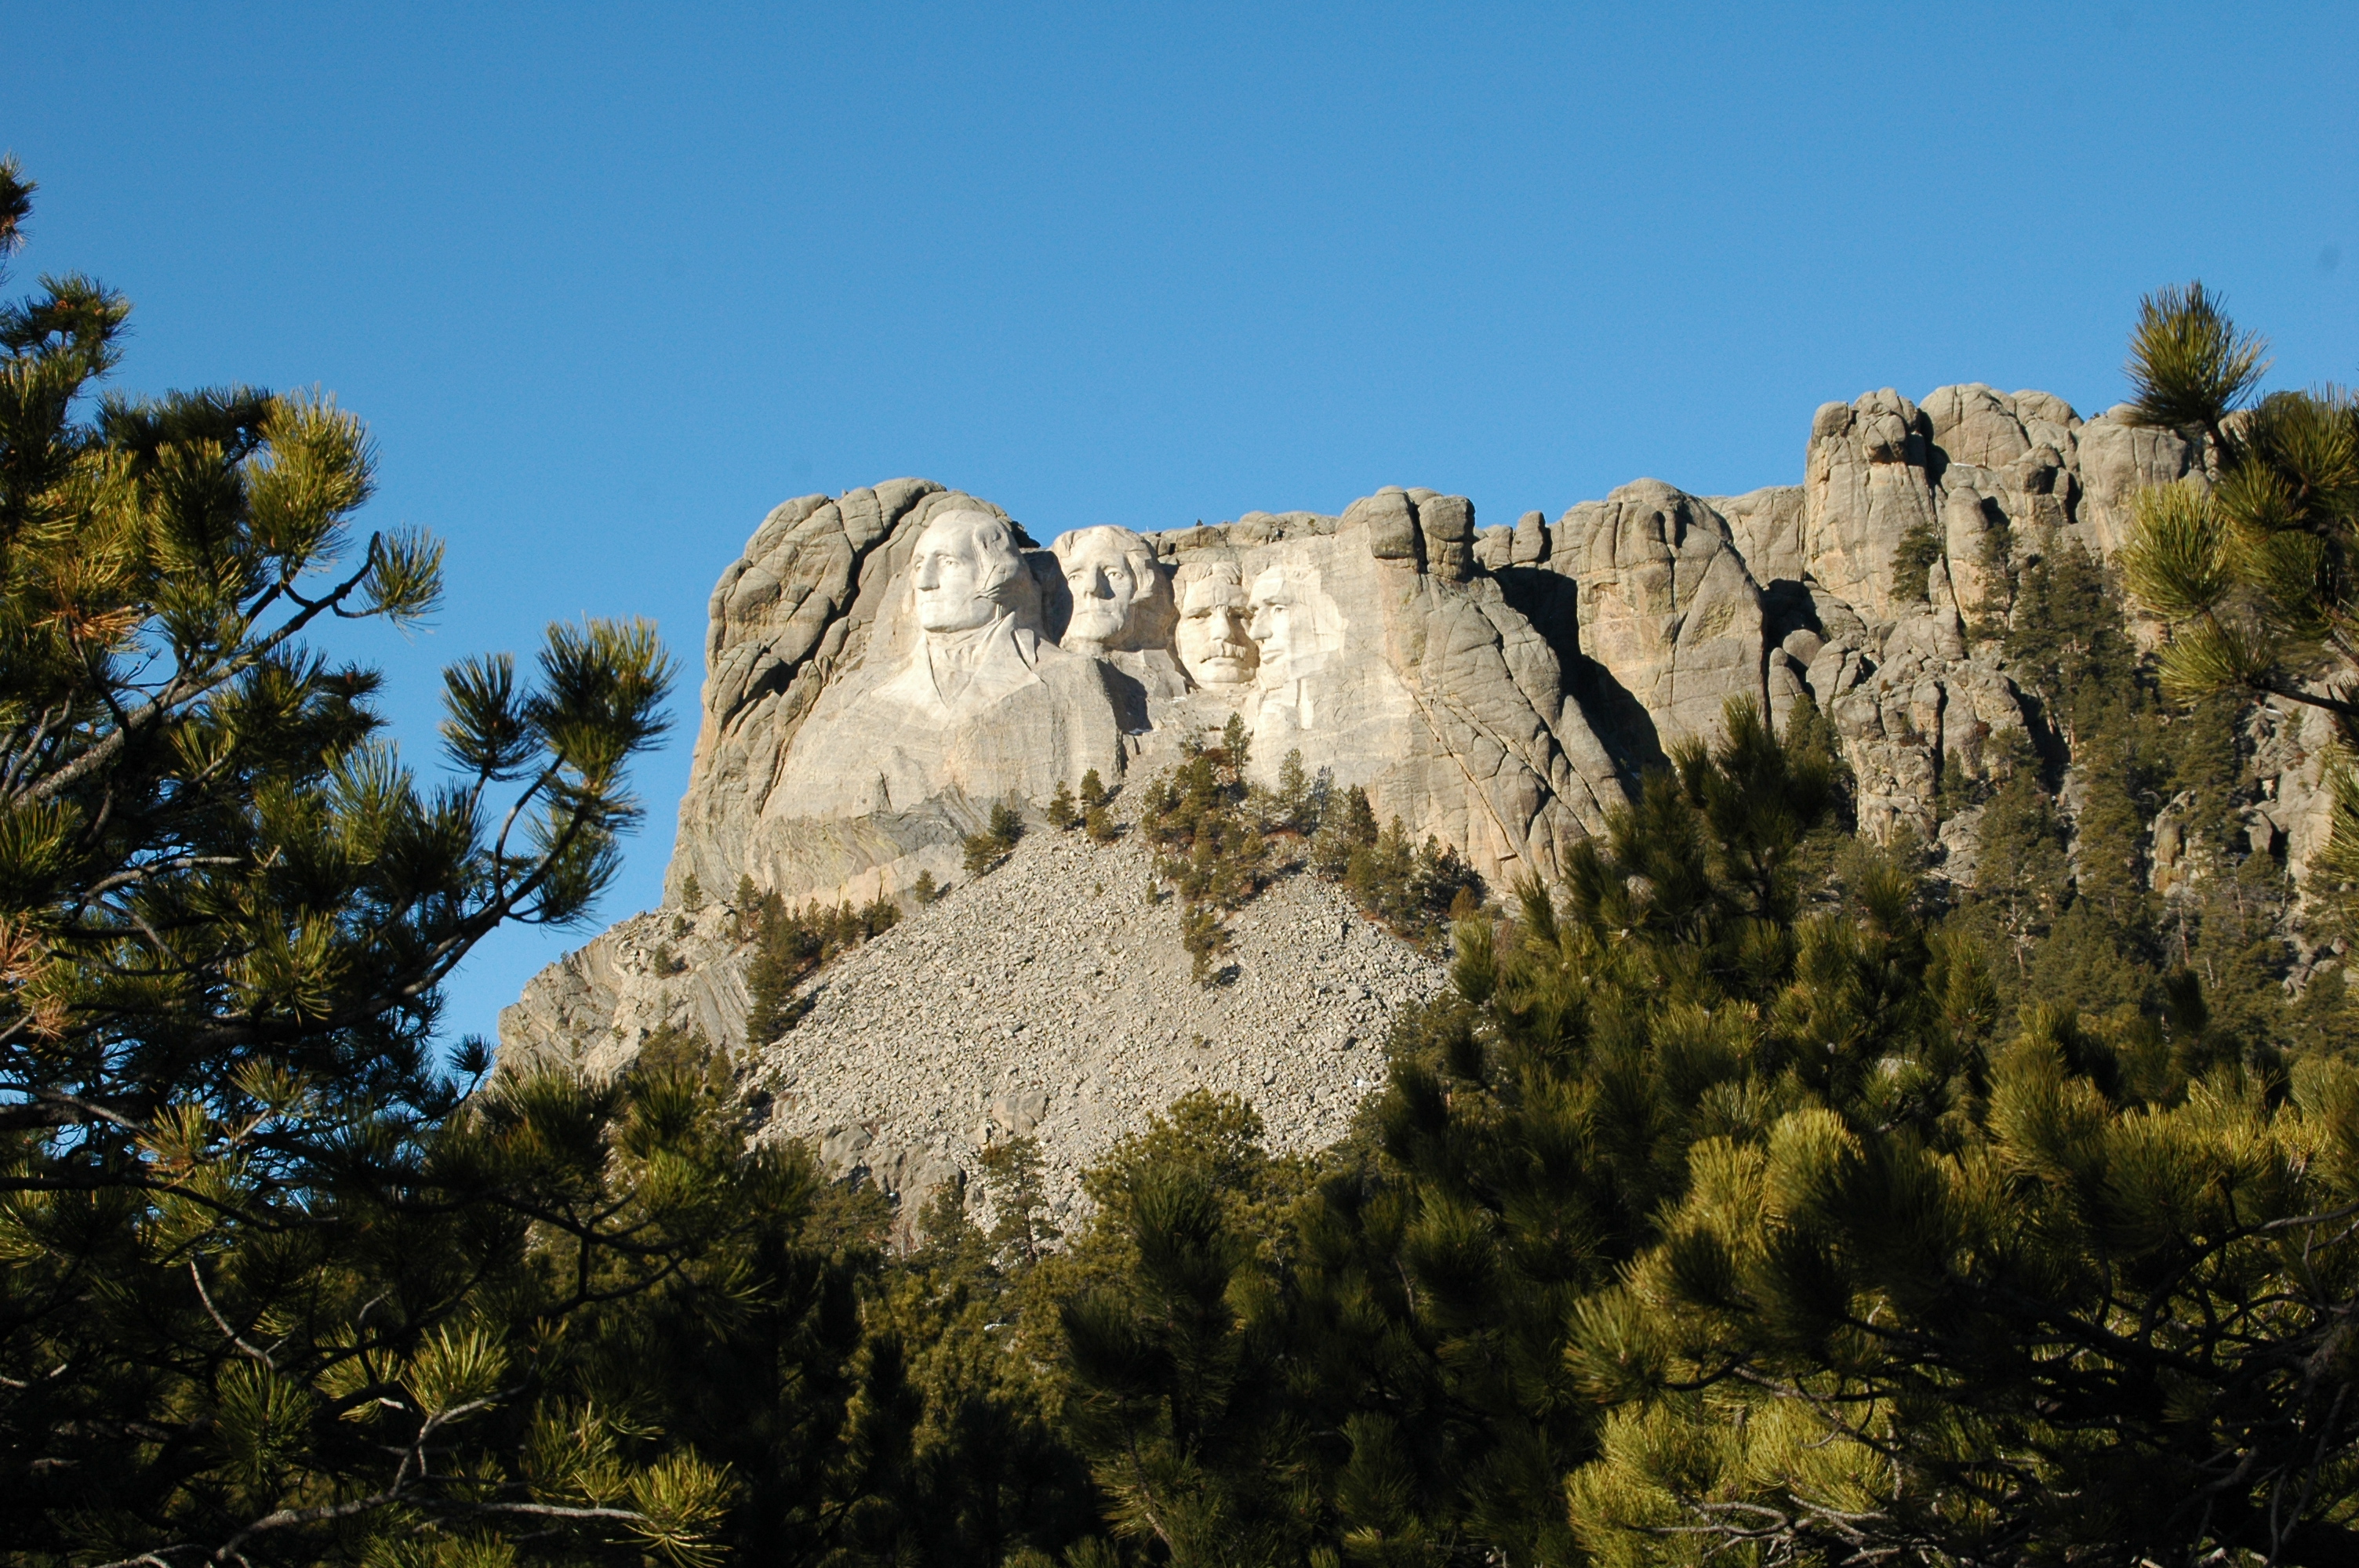 Mount Rushmore viewed from a distance through ponderosa pine trees.